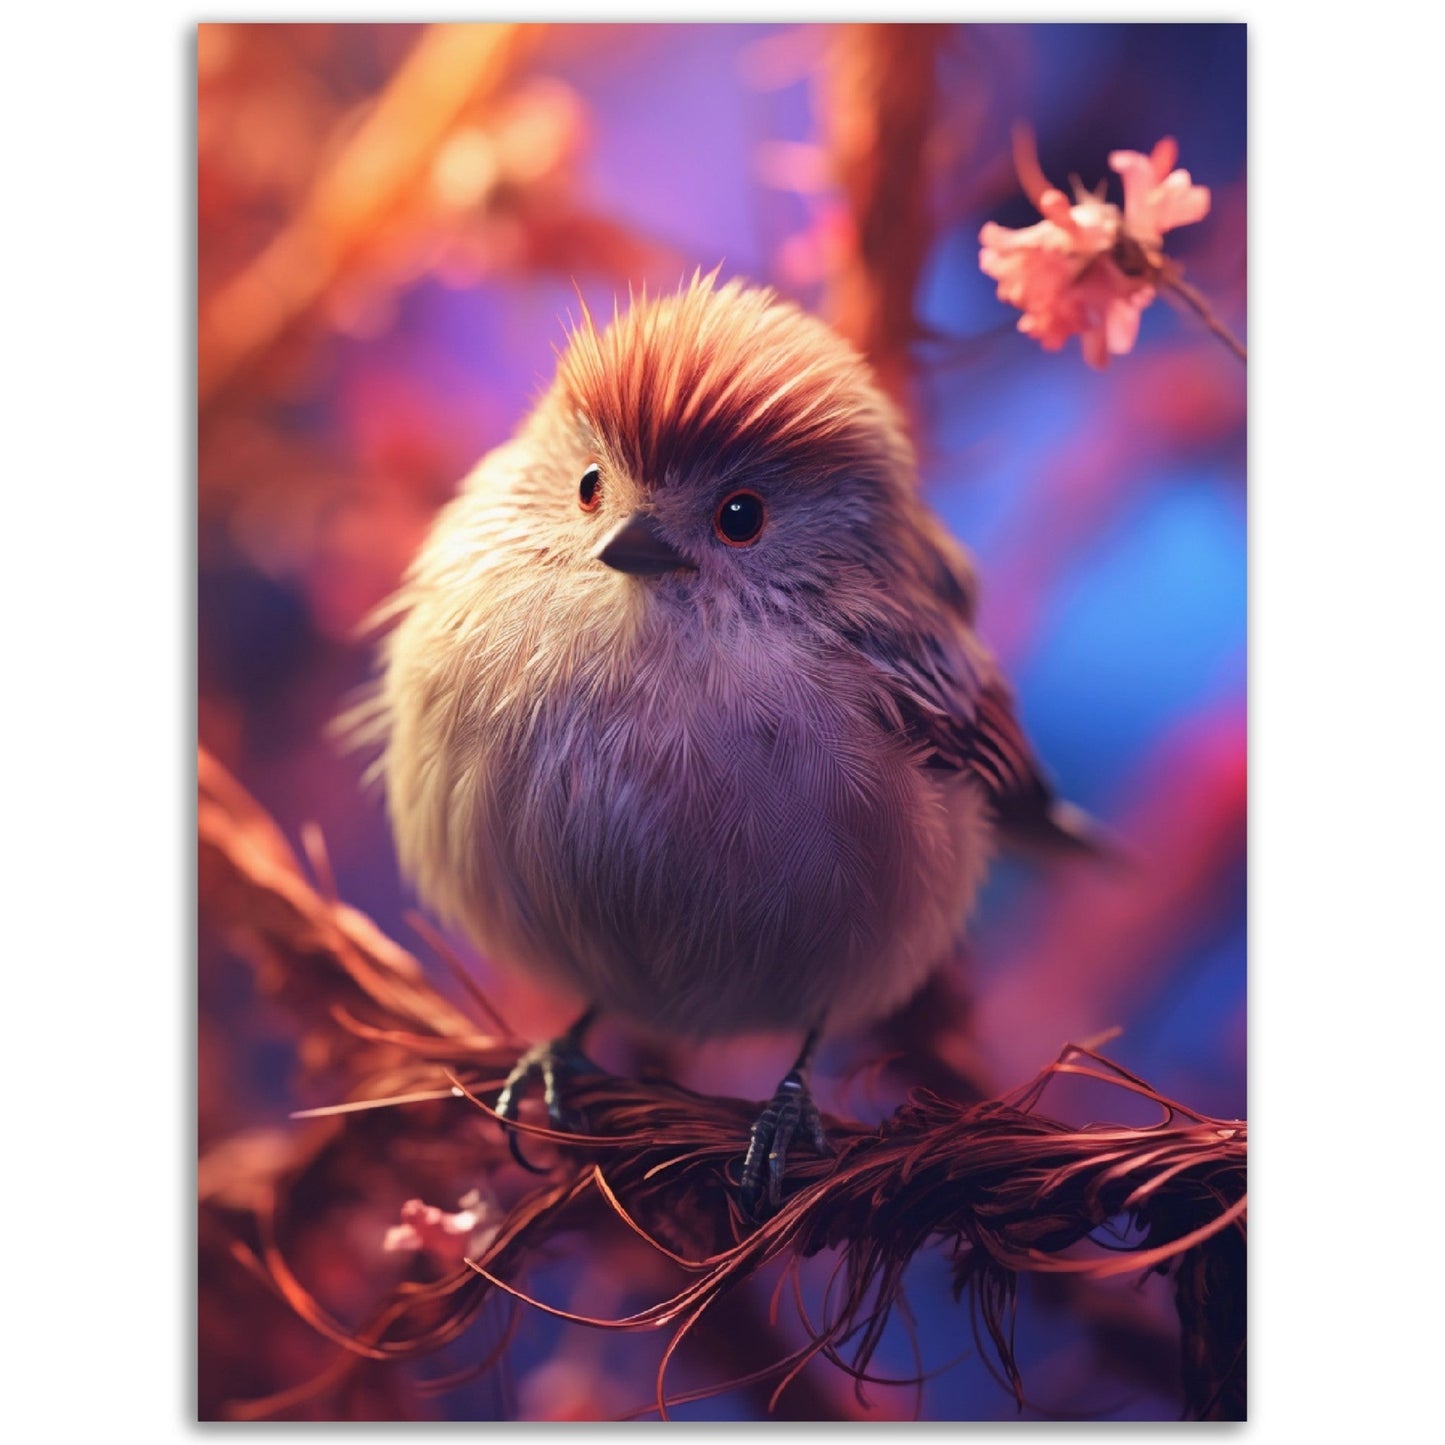 A small Autumn Bird sitting on a branch with flowers, perfect for Poster Wall Art.